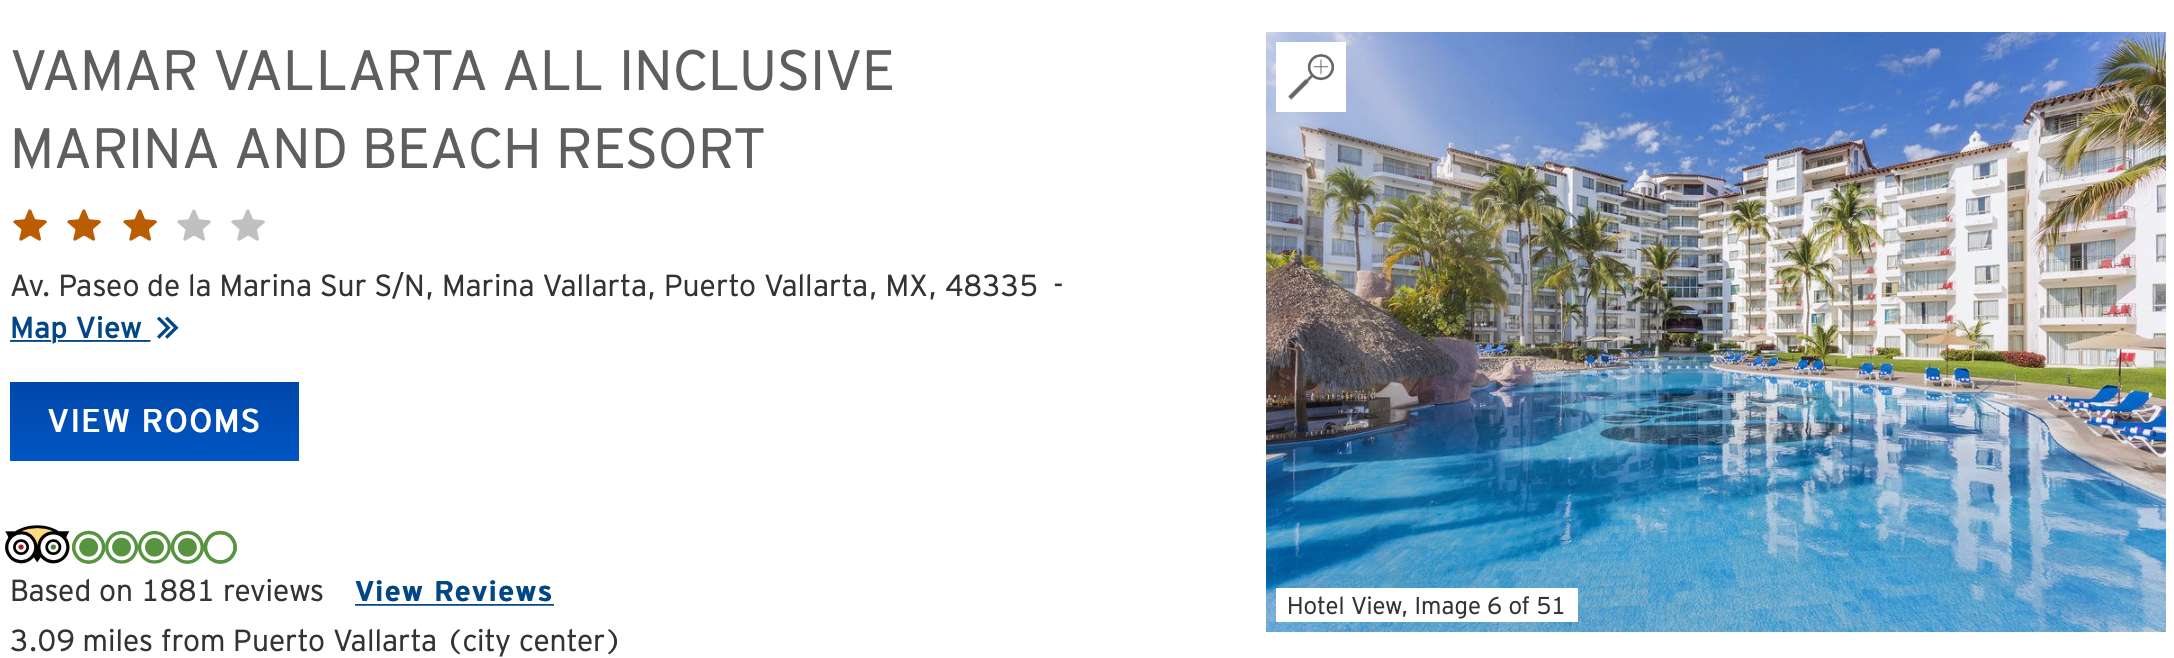 Screen Shot 2019 09 03 at 4.00.54 PM - Don&rsquo;t transfer points: It may be better to book an all-inclusive resort through your credit card portal